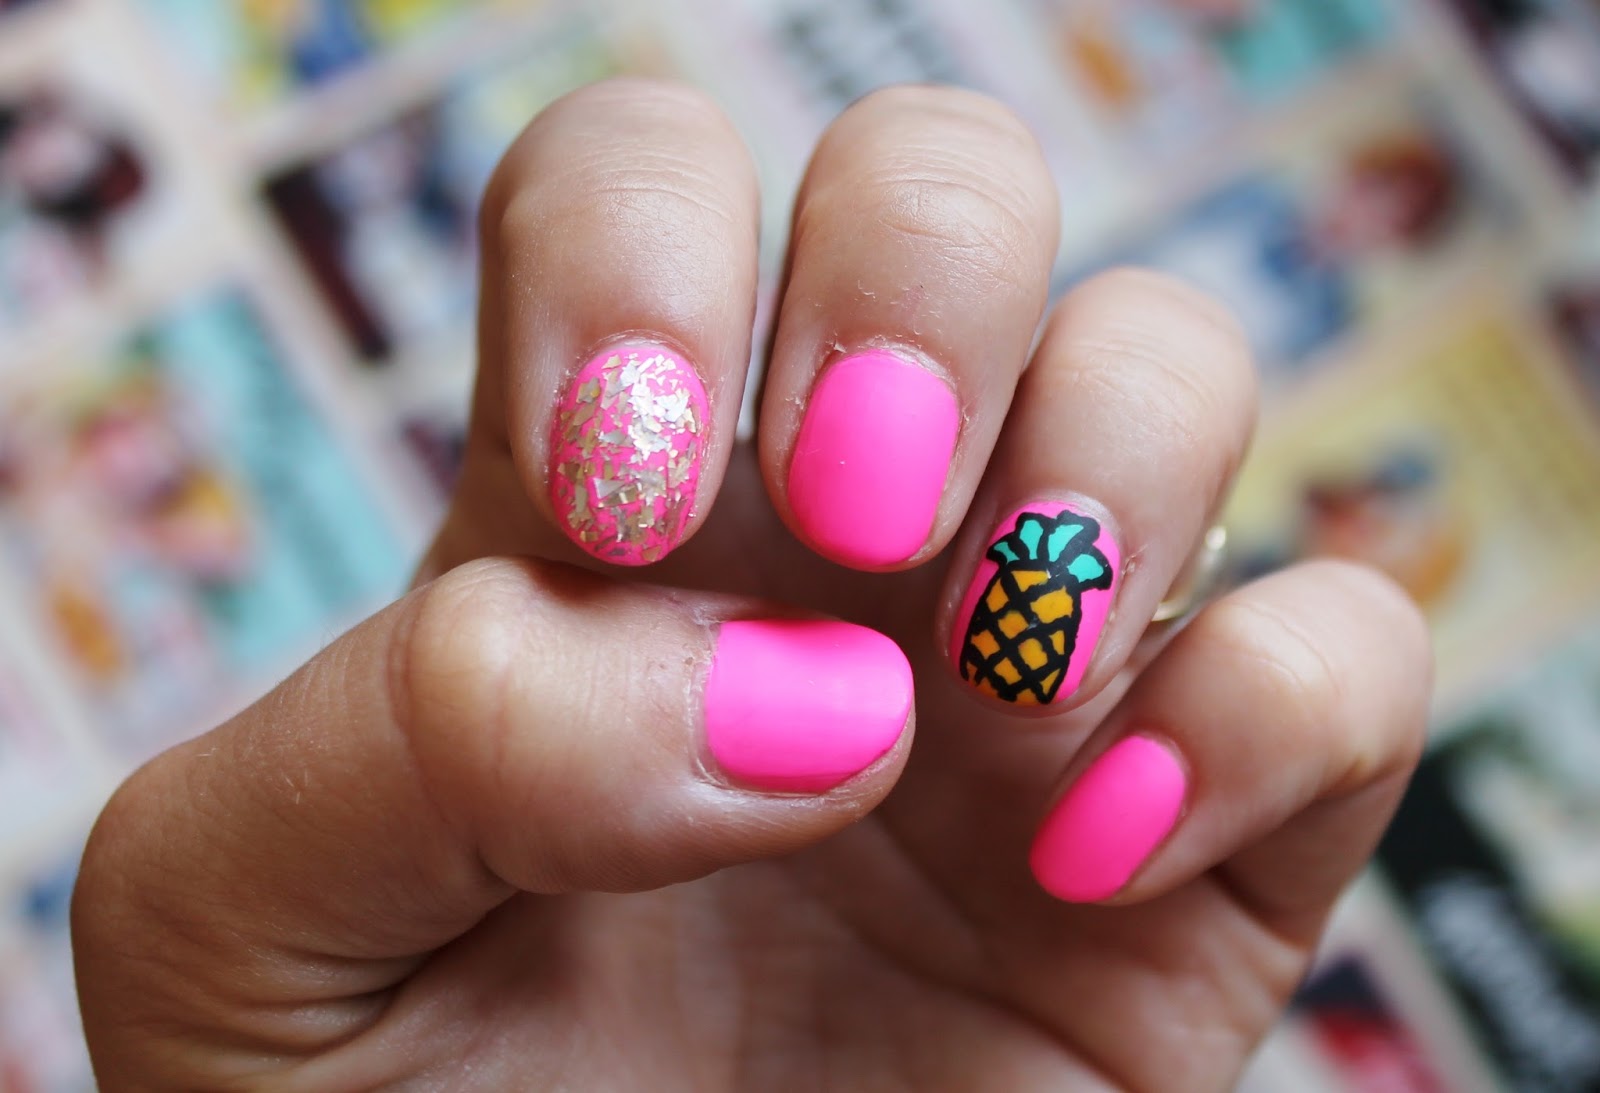 10. Tropical Nail Art Designs for Summer - wide 10